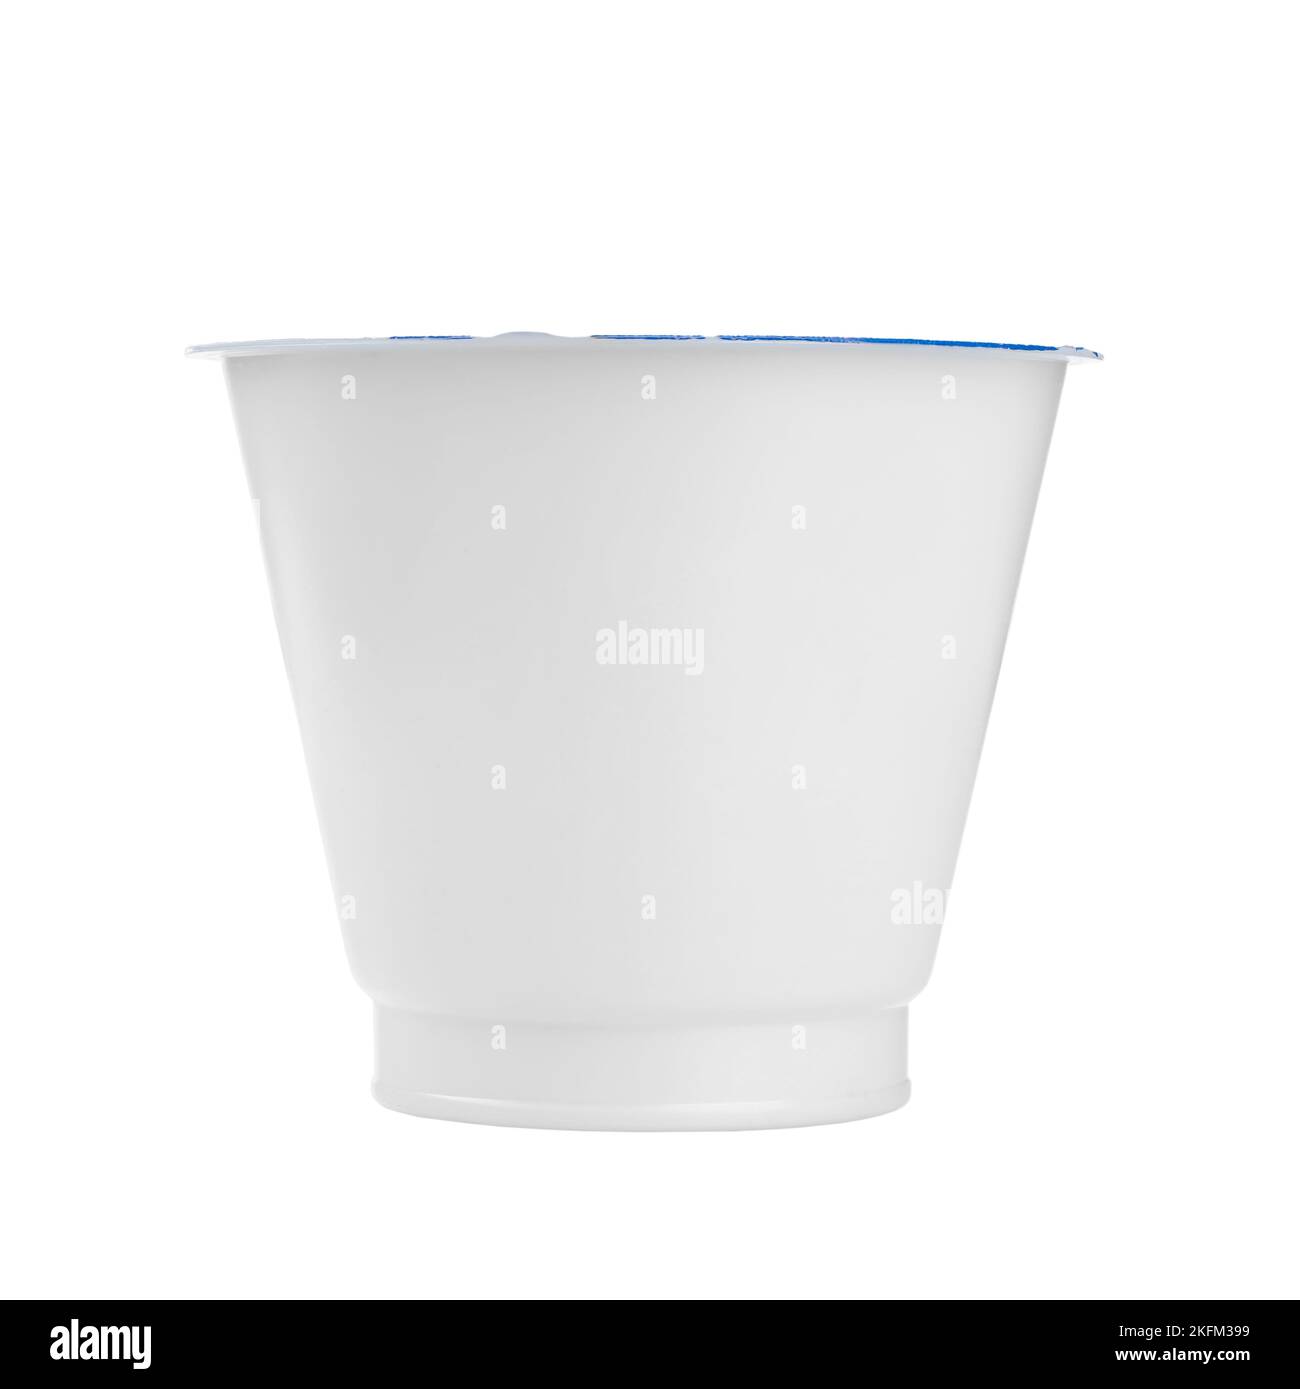 https://c8.alamy.com/comp/2KFM399/plastic-yogurt-container-with-peel-off-lid-yoghurt-packaging-cup-with-foil-cover-template-dairy-product-blank-white-package-mock-up-file-contains-2KFM399.jpg